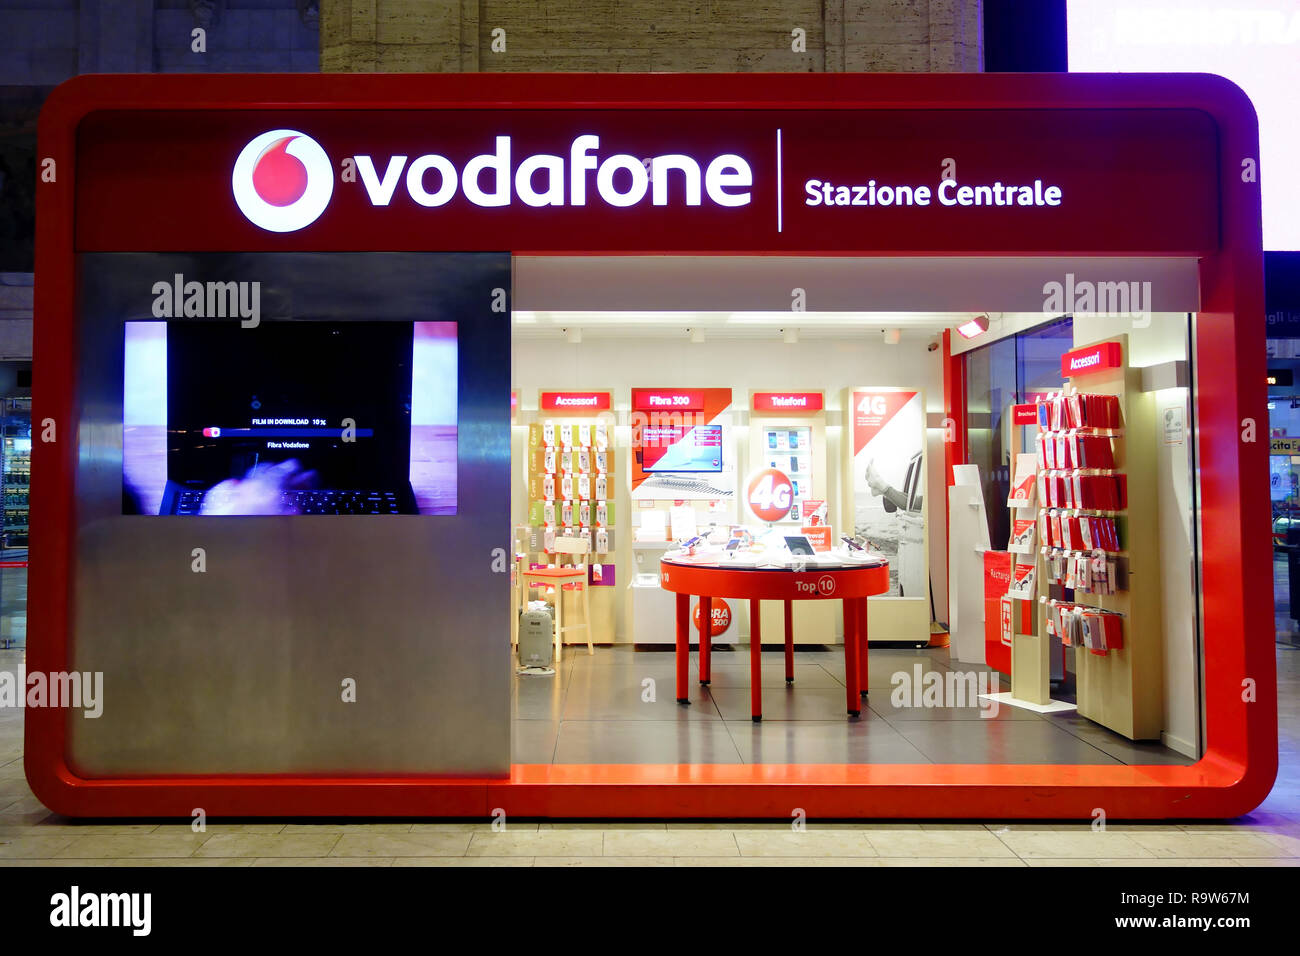 Milan, Italy - Oct 2016: Vodafone Multinational telecommunications company stand at central railway station Stock Photo